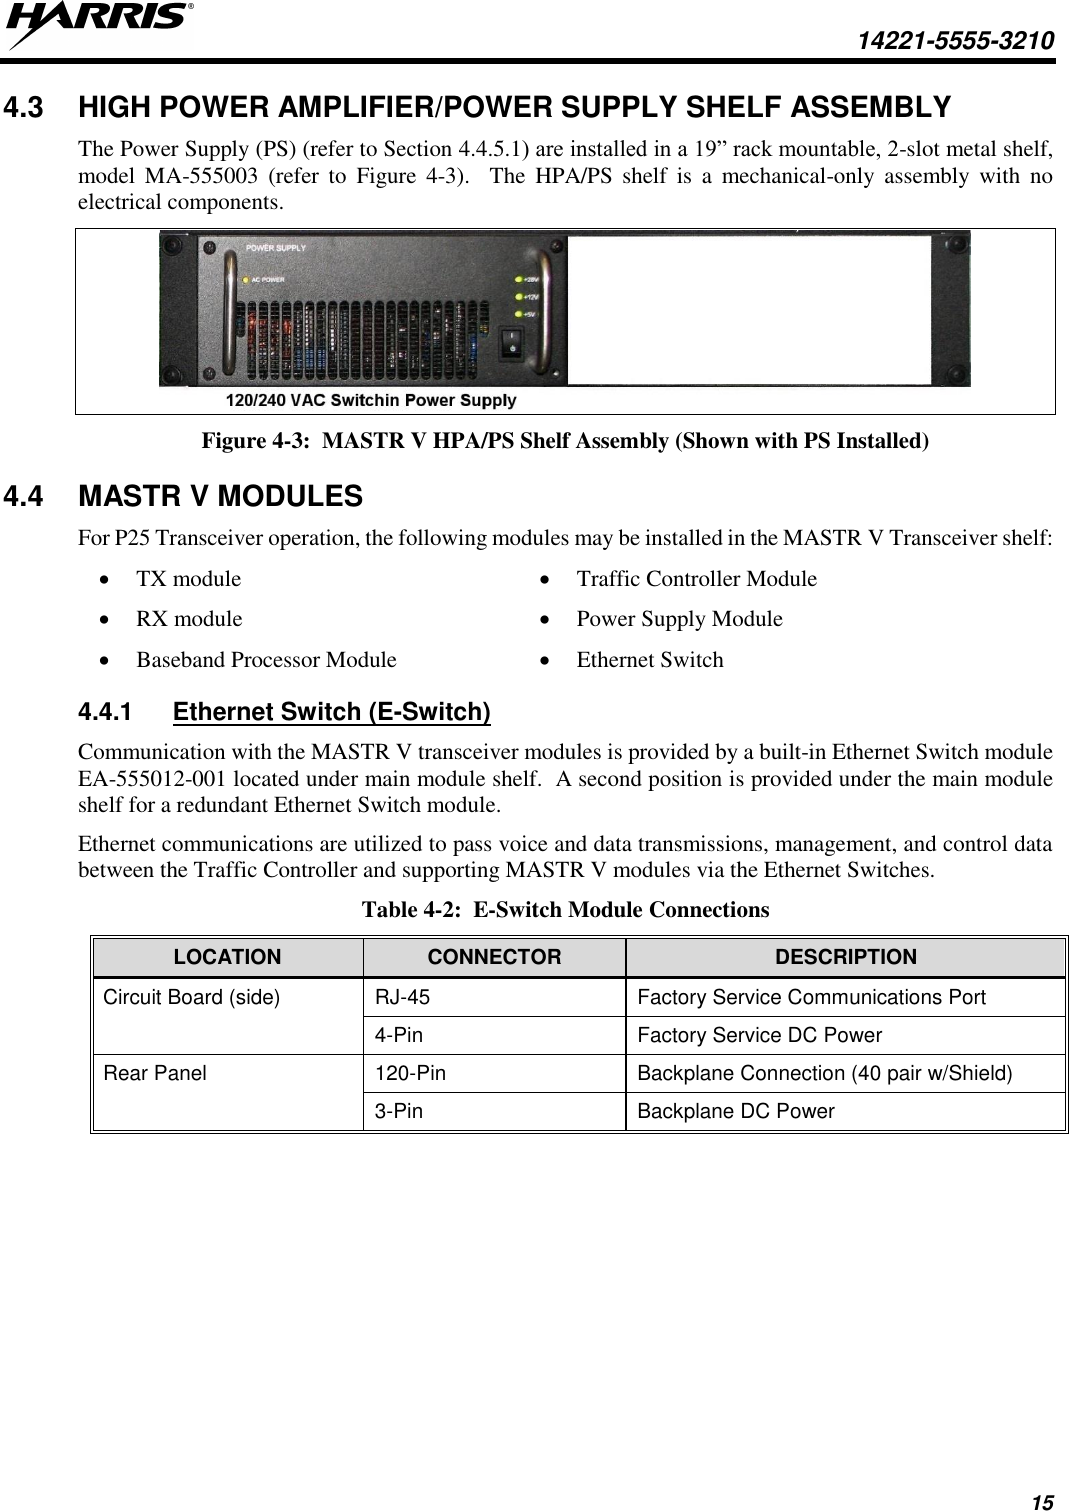  14221-5555-3210 15 4.3  HIGH POWER AMPLIFIER/POWER SUPPLY SHELF ASSEMBLY The Power Supply (PS) (refer to Section 4.4.5.1) are installed in a 19” rack mountable, 2-slot metal shelf, model  MA-555003  (refer to  Figure  4-3).    The  HPA/PS  shelf  is  a  mechanical-only  assembly  with  no electrical components.  Figure 4-3:  MASTR V HPA/PS Shelf Assembly (Shown with PS Installed) 4.4  MASTR V MODULES For P25 Transceiver operation, the following modules may be installed in the MASTR V Transceiver shelf: • TX module • RX module • Baseband Processor Module • Traffic Controller Module • Power Supply Module • Ethernet Switch 4.4.1  Ethernet Switch (E-Switch) Communication with the MASTR V transceiver modules is provided by a built-in Ethernet Switch module EA-555012-001 located under main module shelf.  A second position is provided under the main module shelf for a redundant Ethernet Switch module. Ethernet communications are utilized to pass voice and data transmissions, management, and control data between the Traffic Controller and supporting MASTR V modules via the Ethernet Switches.   Table 4-2:  E-Switch Module Connections LOCATION CONNECTOR  DESCRIPTION Circuit Board (side) RJ-45 Factory Service Communications Port 4-Pin Factory Service DC Power  Rear Panel 120-Pin Backplane Connection (40 pair w/Shield) 3-Pin Backplane DC Power  